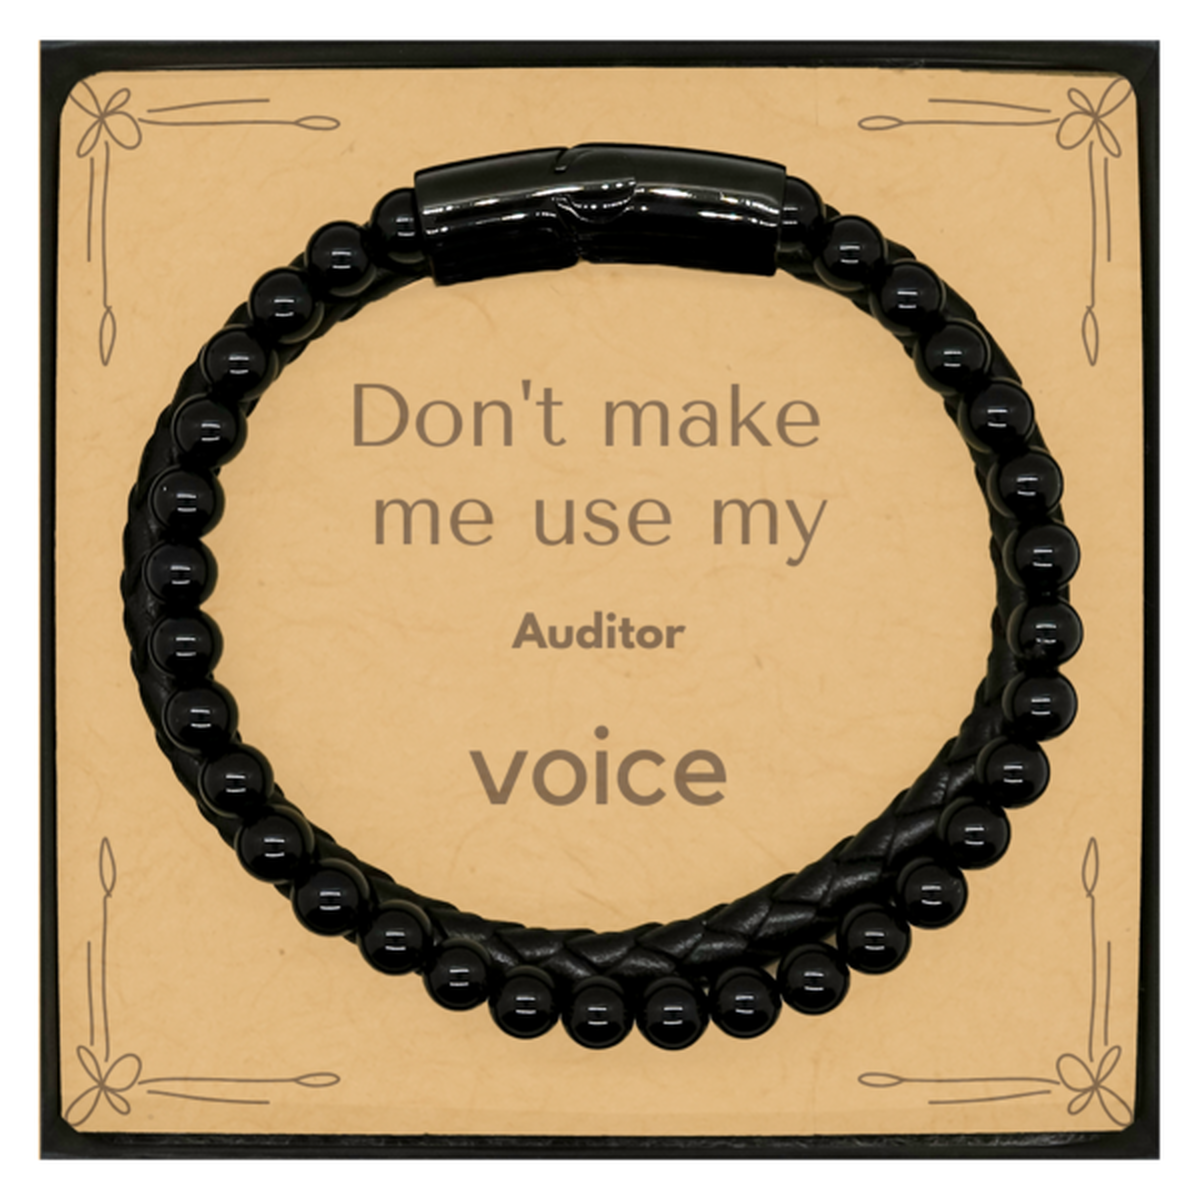 Don't make me use my Auditor voice, Sarcasm Auditor Card Gifts, Christmas Auditor Stone Leather Bracelets Birthday Unique Gifts For Auditor Coworkers, Men, Women, Colleague, Friends